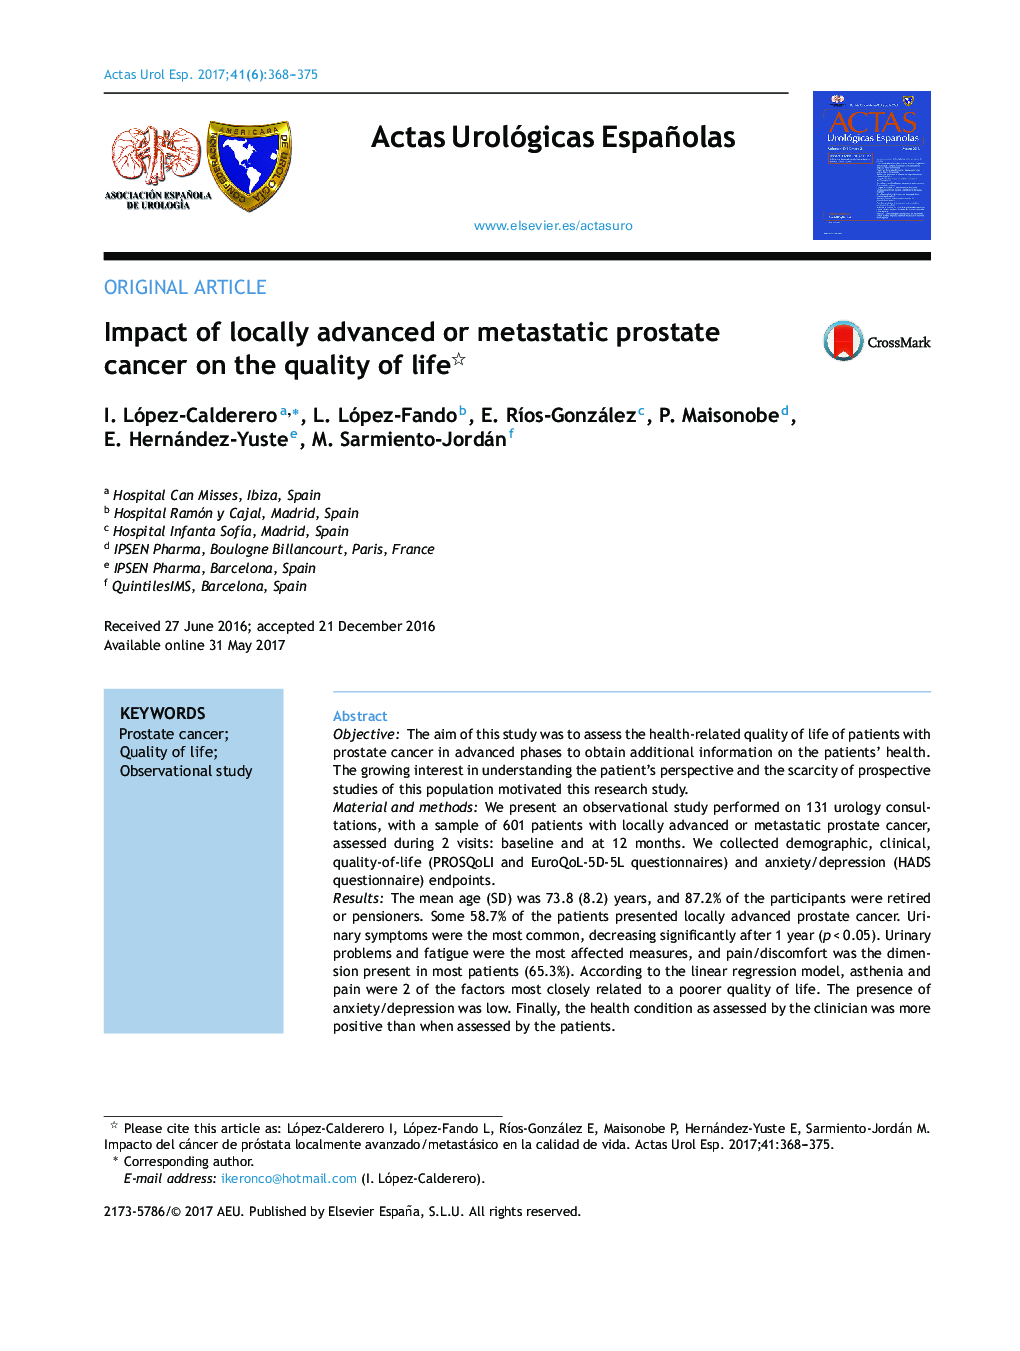 Impact of locally advanced or metastatic prostate cancer on the quality of life